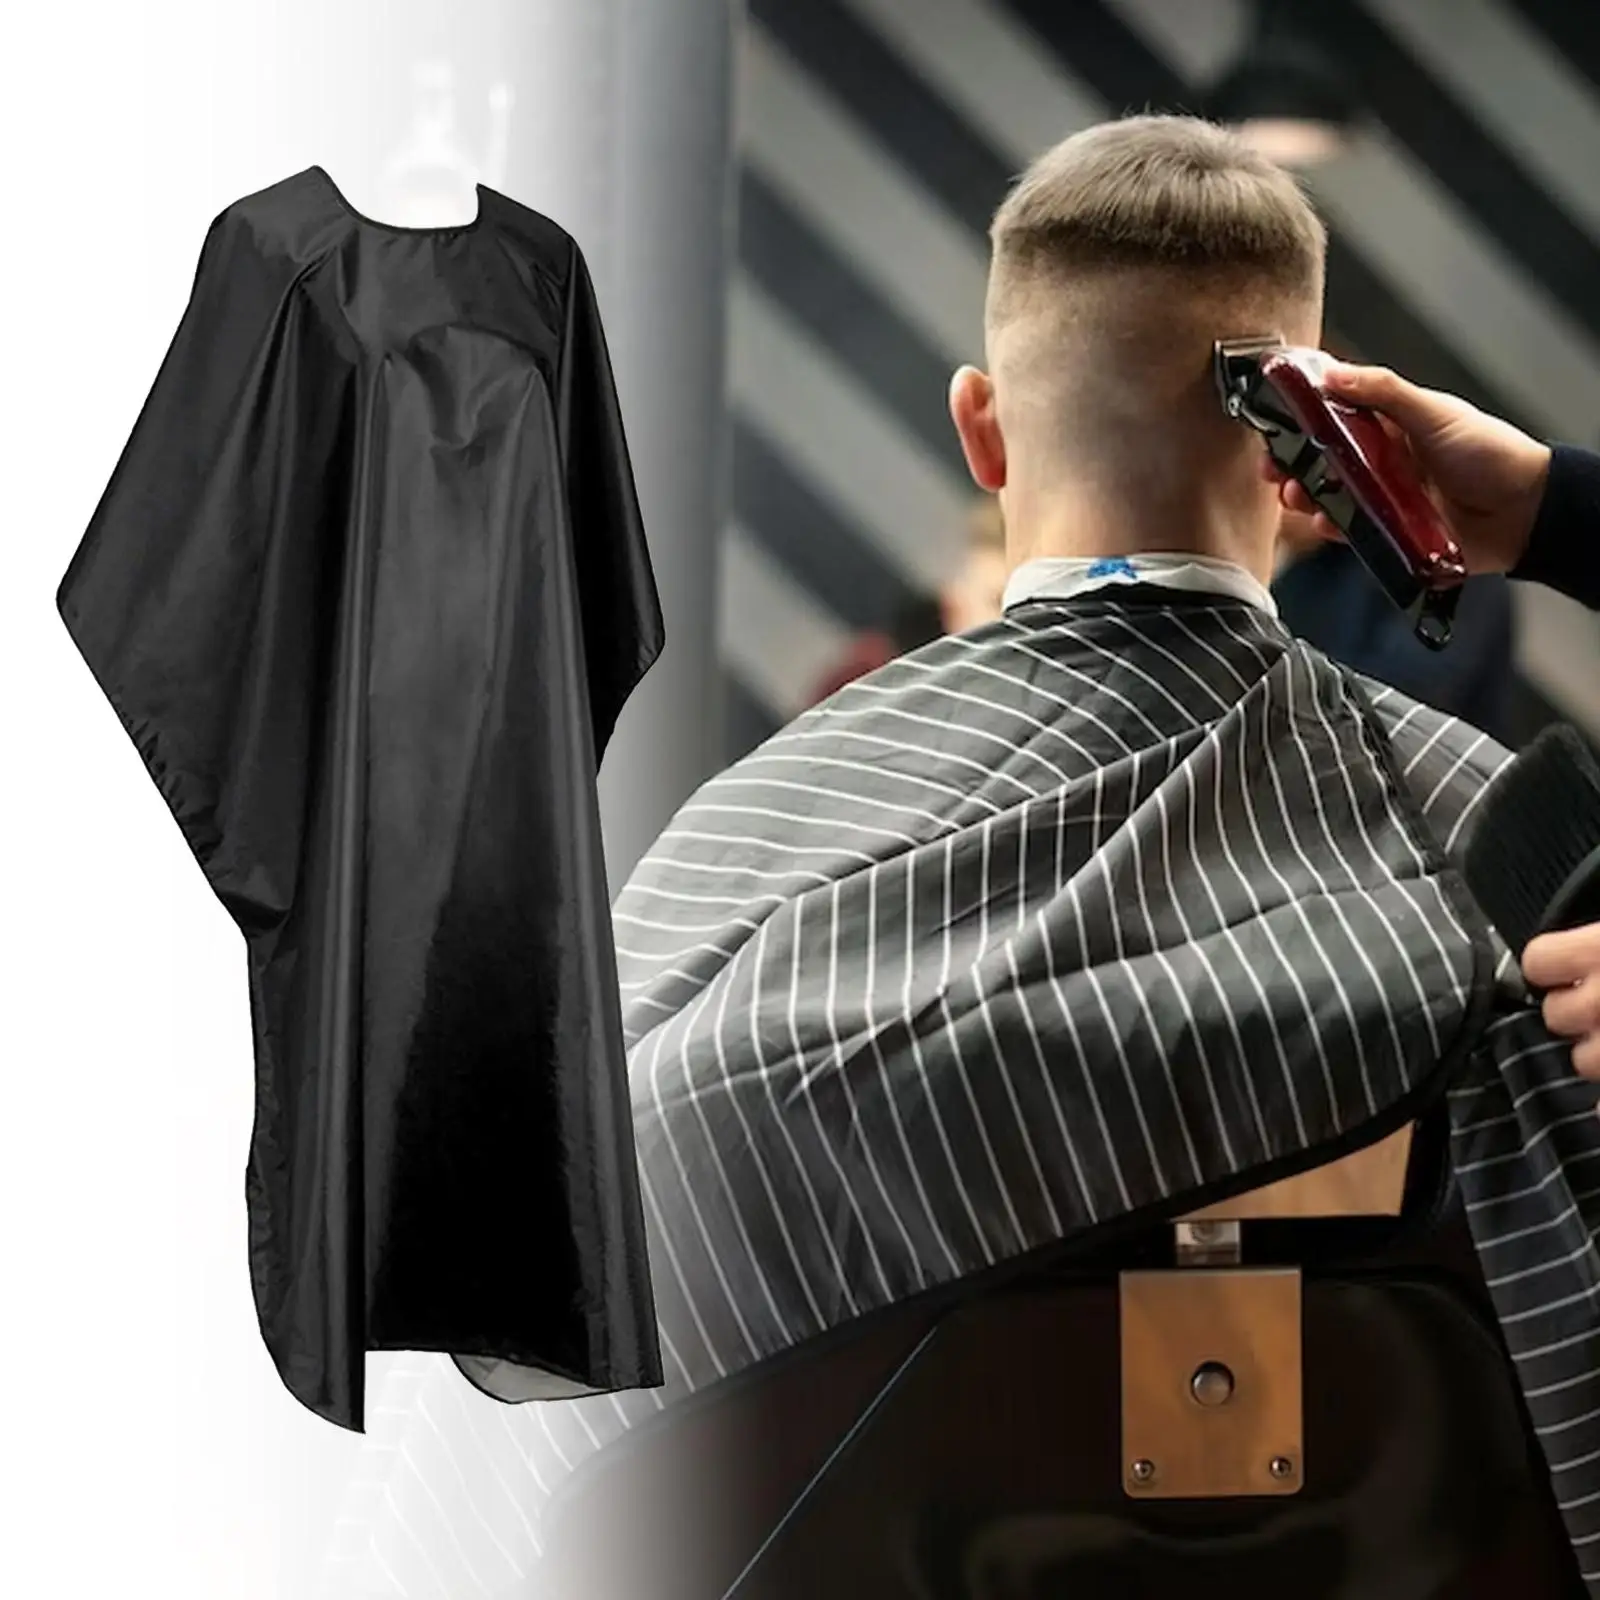 Barber Cape Hair Cutting Apron Smooth Lightweight Supplies Haircut Apron Hairdressing Apron for Cutting Hair Hair Stylists